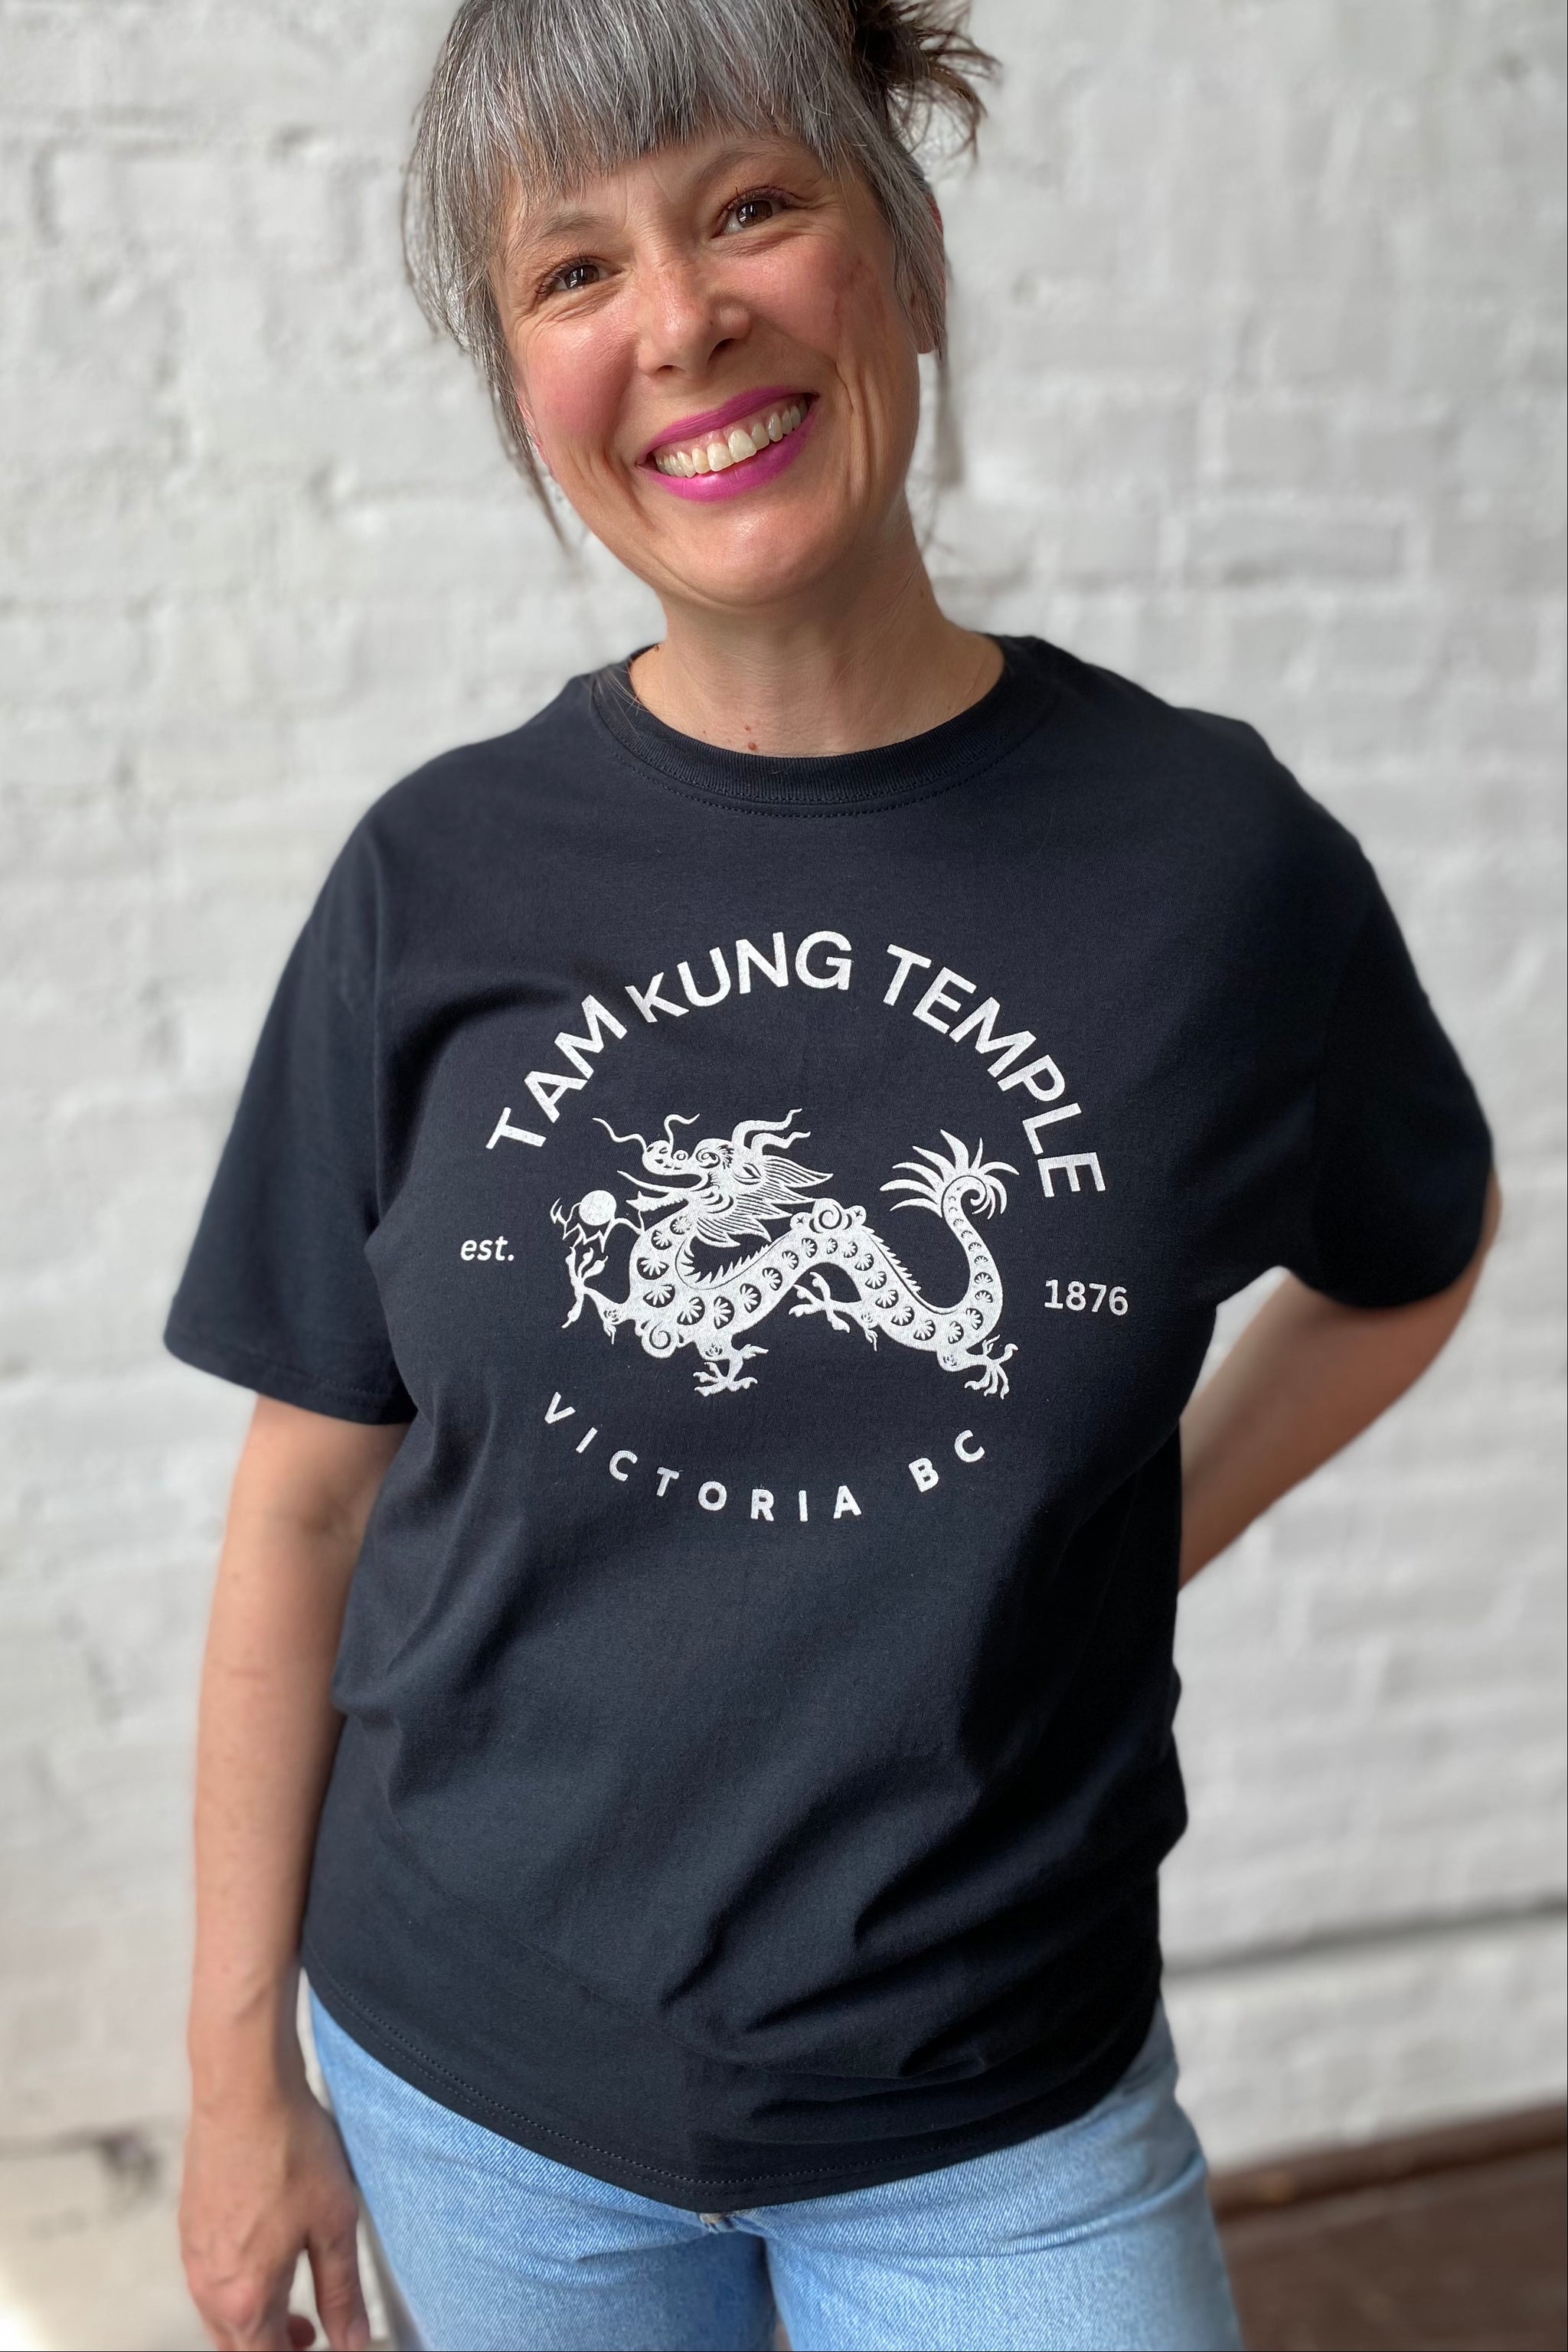 Smiling woman models black unisex tee with a white chinese dragon printed on chest. Dragon is encircled by words 'Tam Kung Temple est. 1876 Victoria BC'